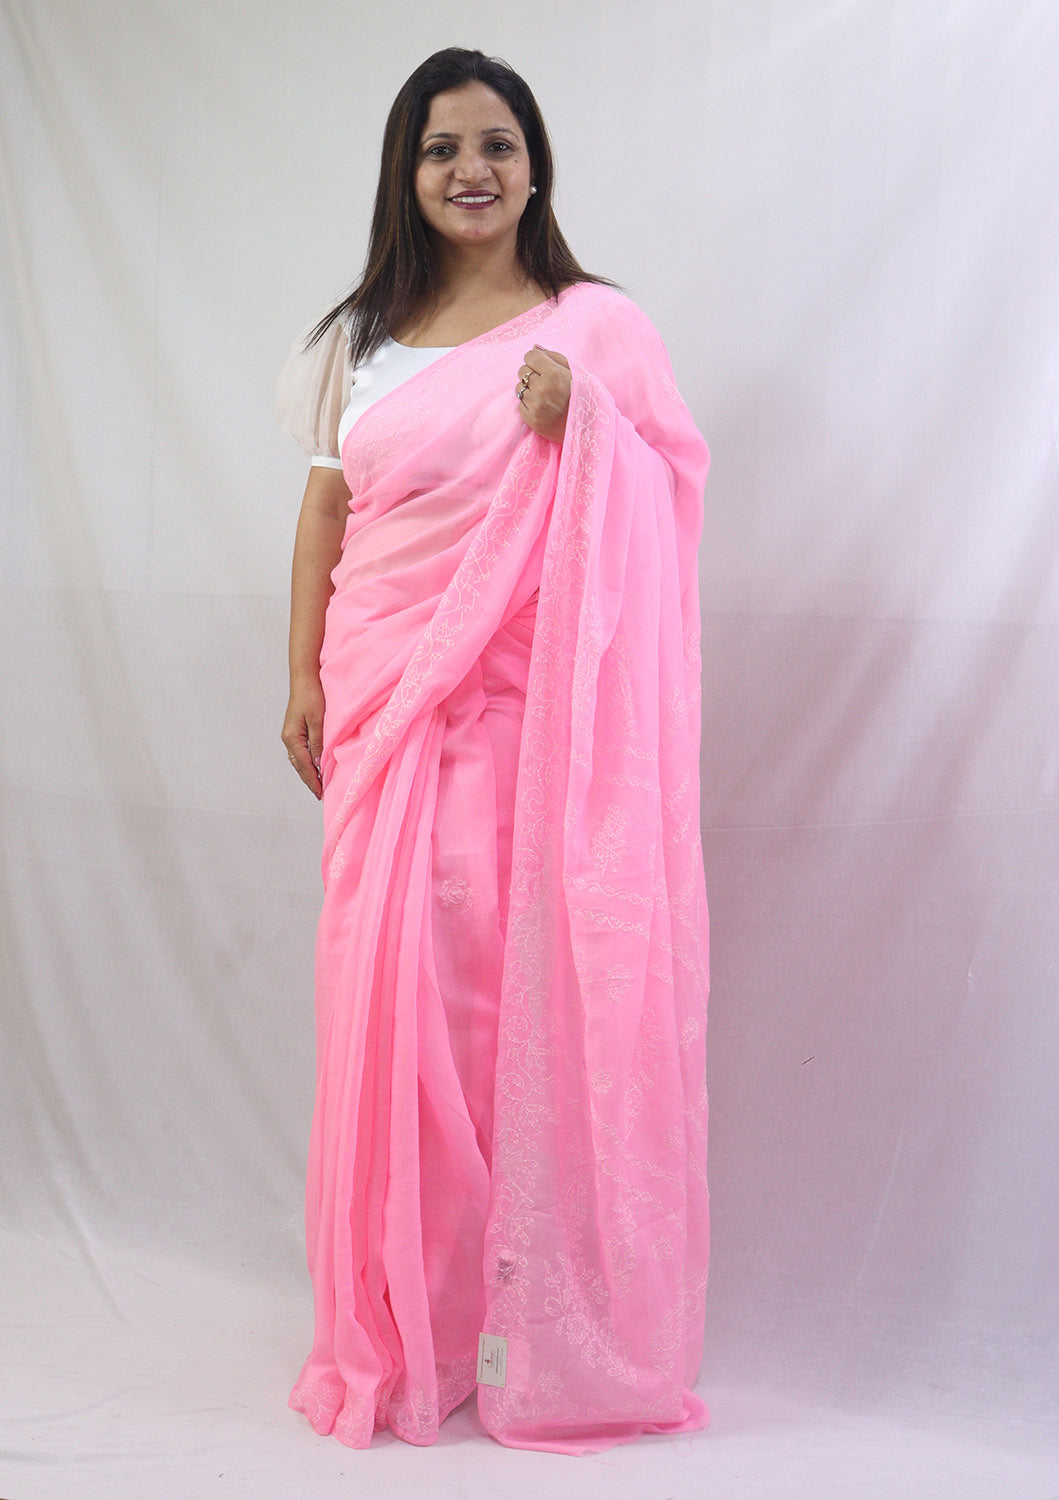 Charming Pink Chikankari Saree with Intricate Embroidery - Pure Cotton